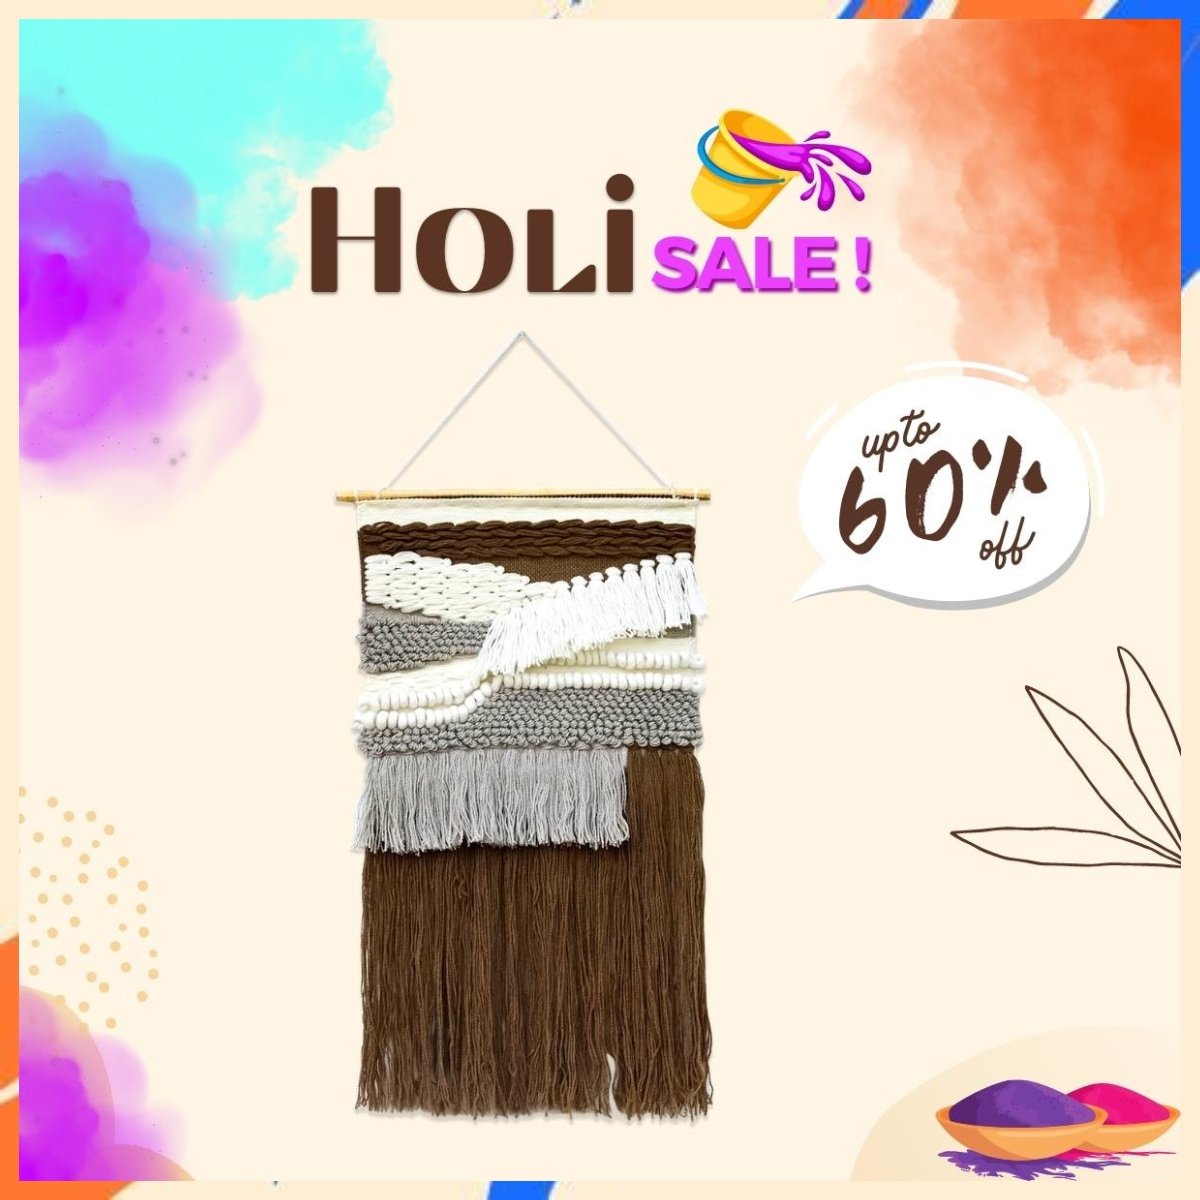 Life doesn't have to be perfectly wonderful, but your wall art hanging definitely needs to be, so as to enhance the aesthetics of your home.
#saraffurniture #insaraf #furniture #woodenfurniture #onlinefurniture #onlinesale #saleonfurniture #holisale #holisale2023 #saleonholi